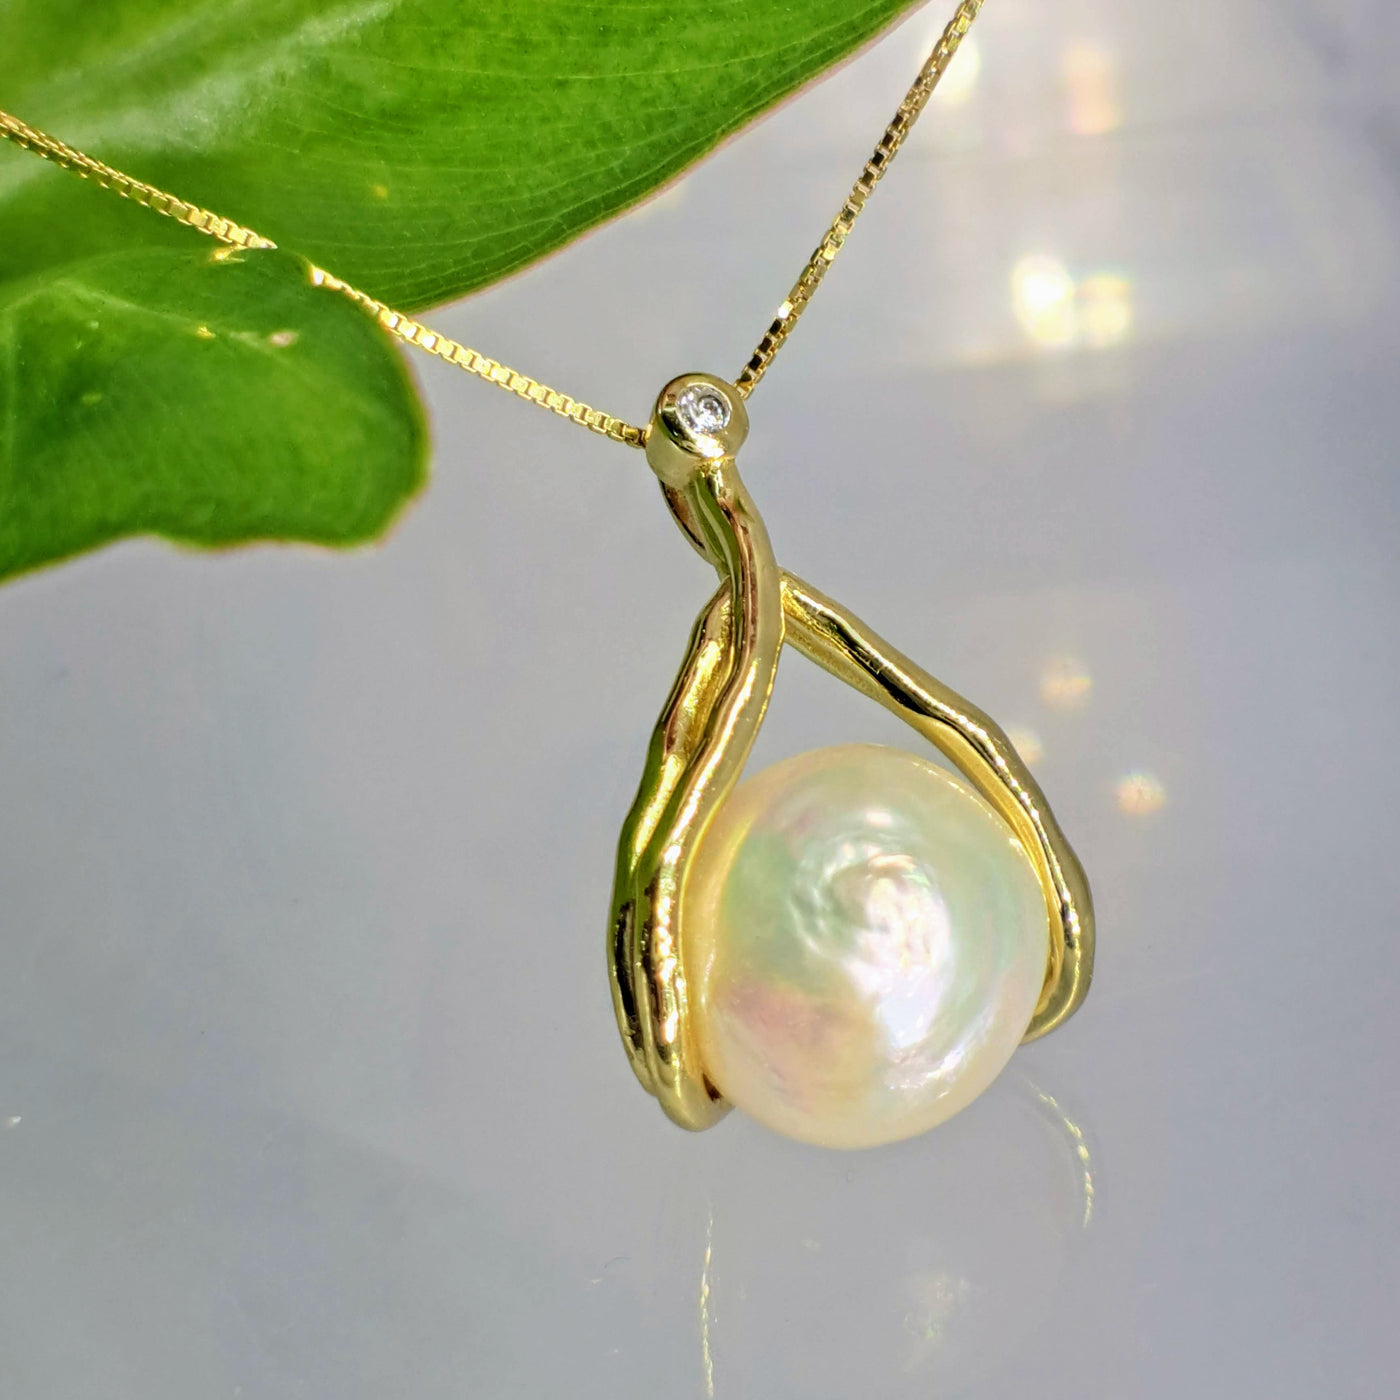 "Beholding Beauty" 1" Pendant On 16" Necklace - Baroque Pearl & Topaz